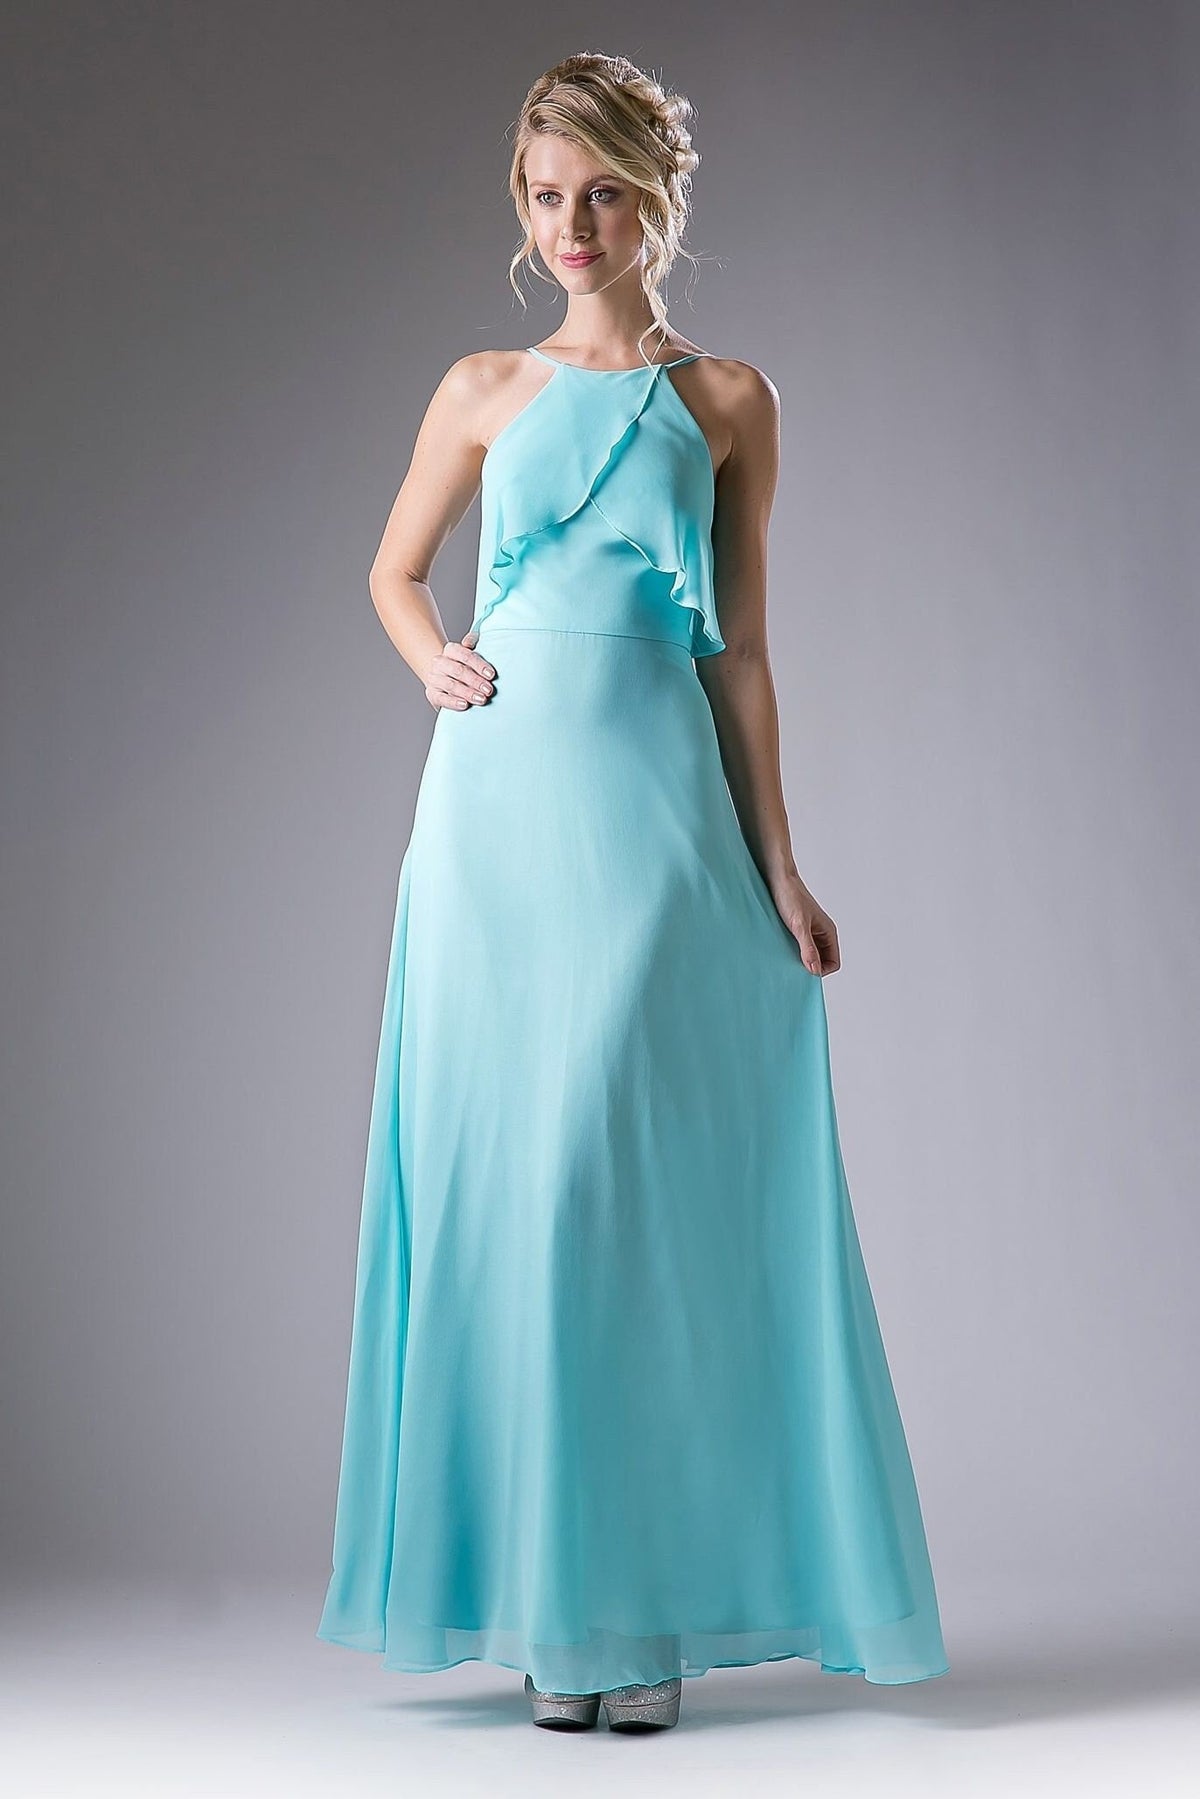 Modern Simple Minimalist Aline Halter Top Prom Dress Formal Gown Chiffon Floor Length Open Back and Straps Sleeveless